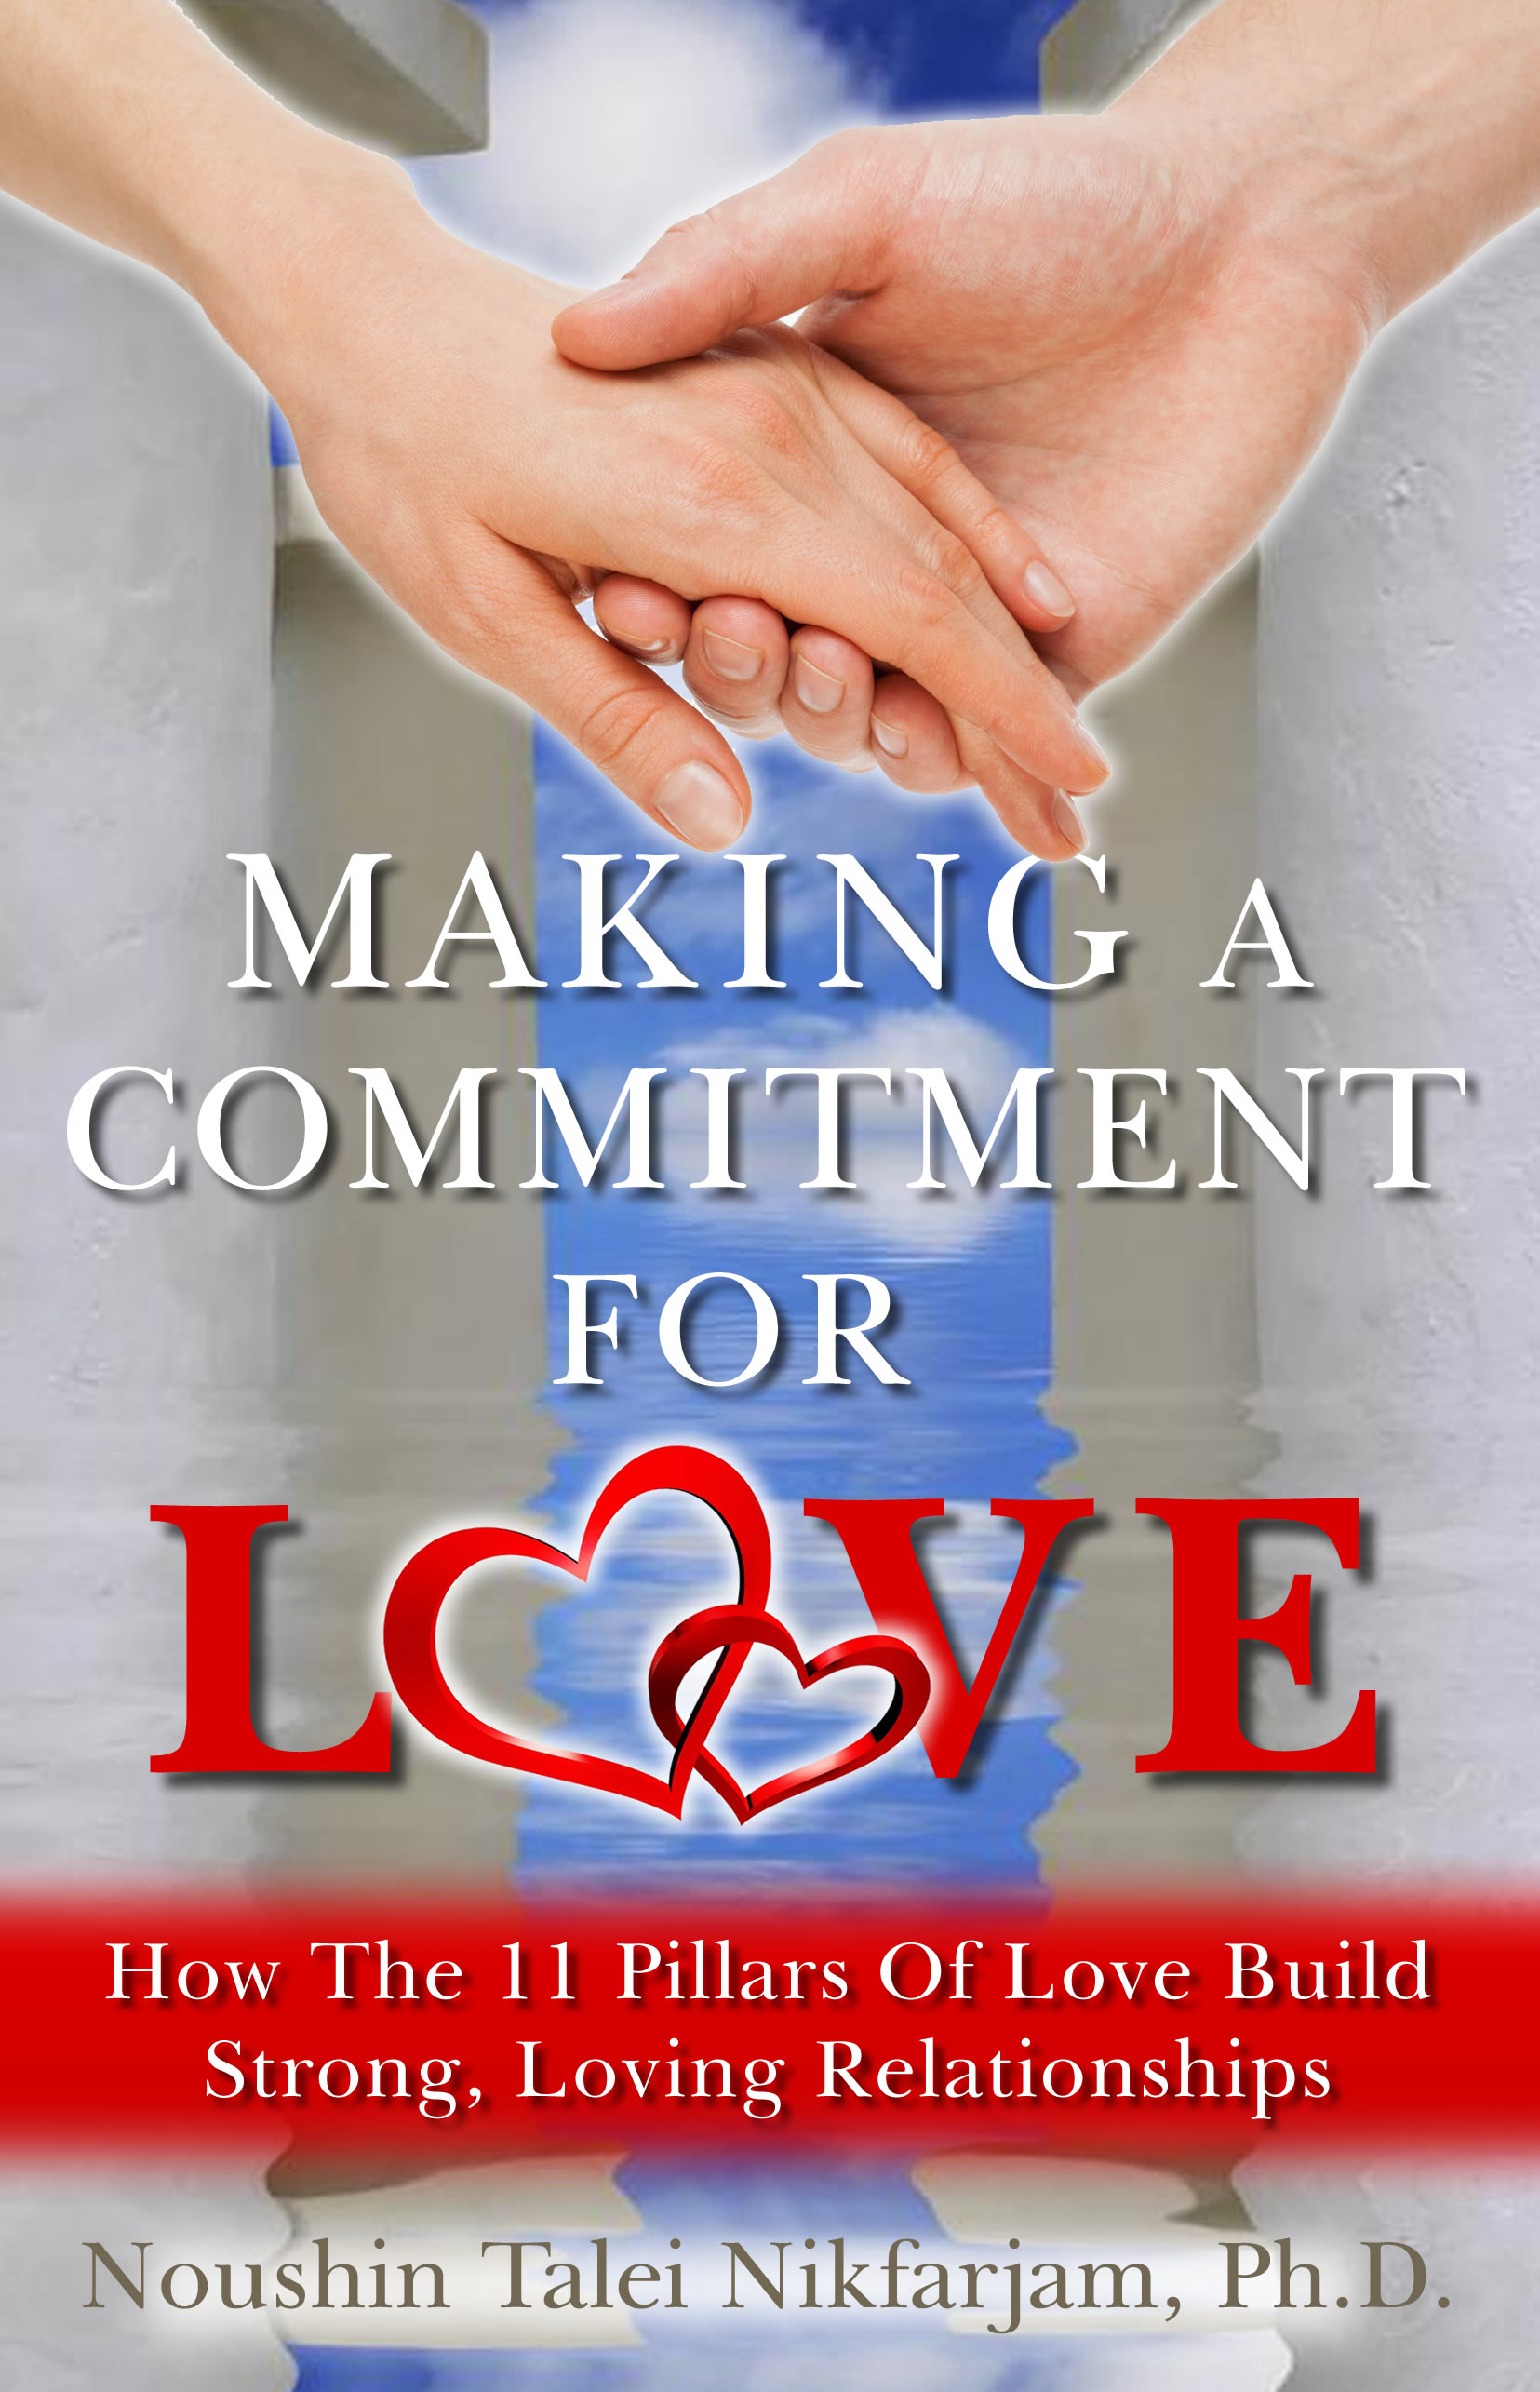 Making A Commitment For Love: How The 11 Pillars Of Love Build Strong, Loving Relationships